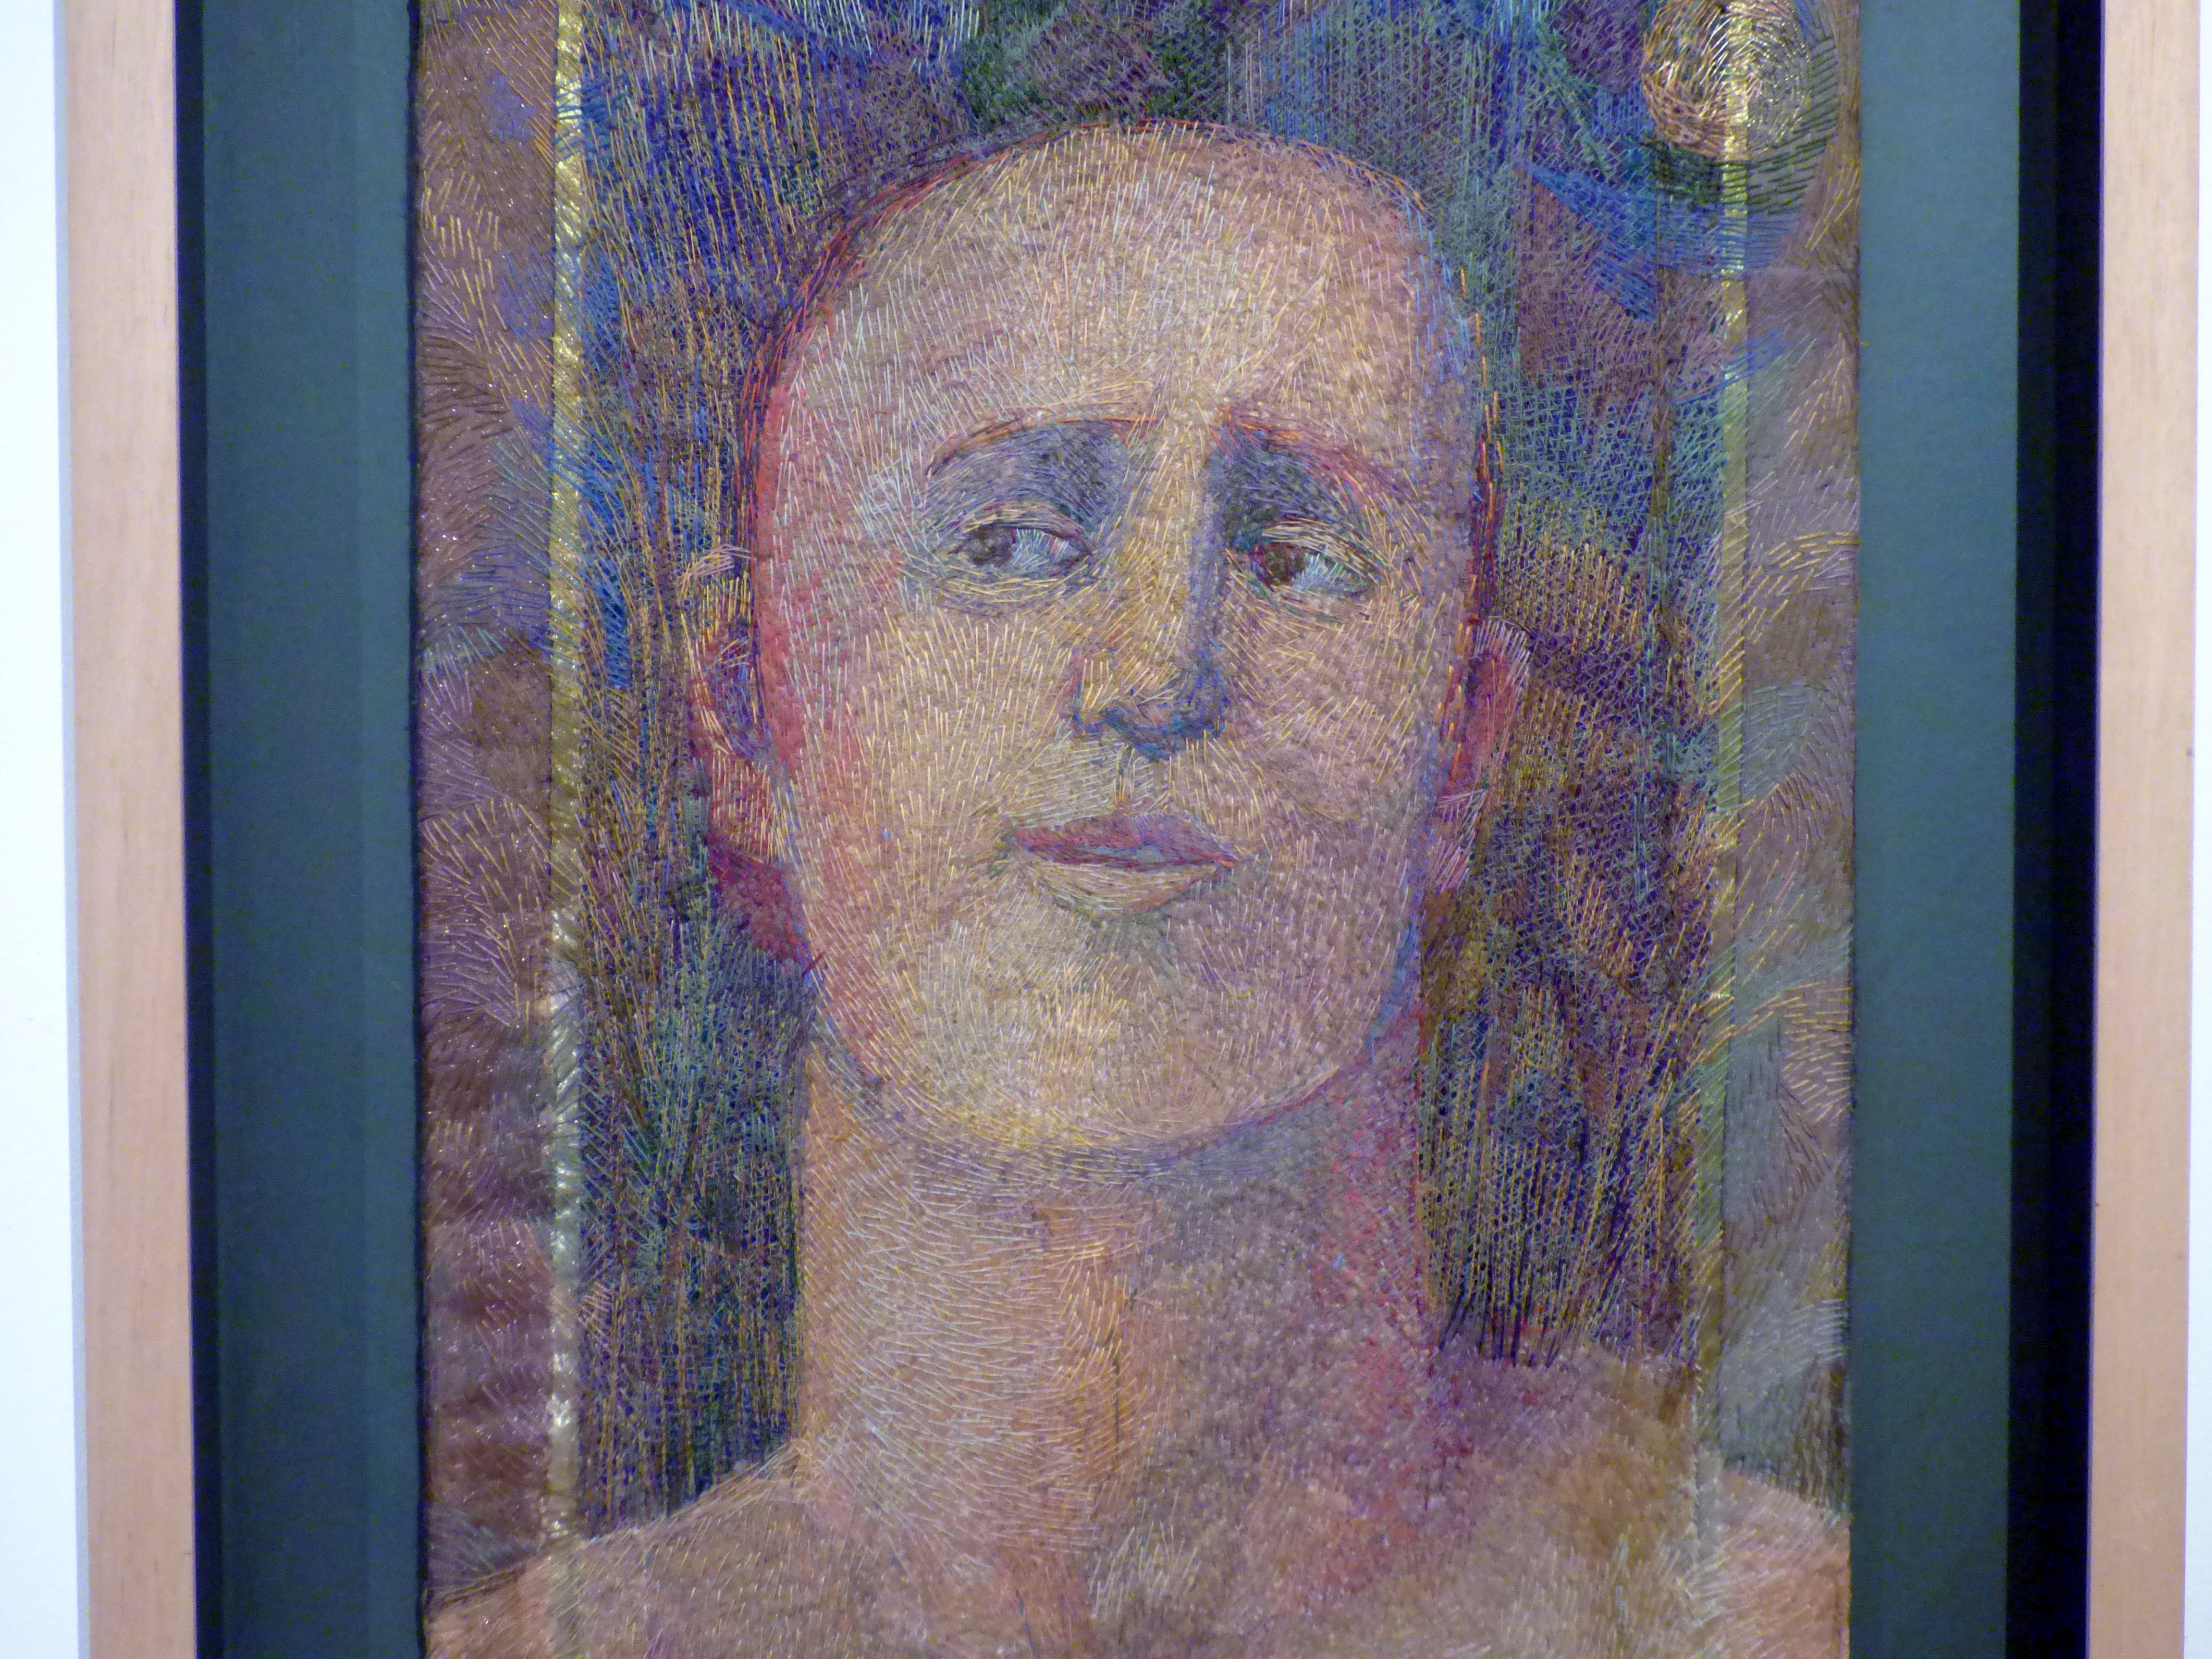 (detail) ADAM AND EVE, by Audrey Walker, stitched textile, 2000